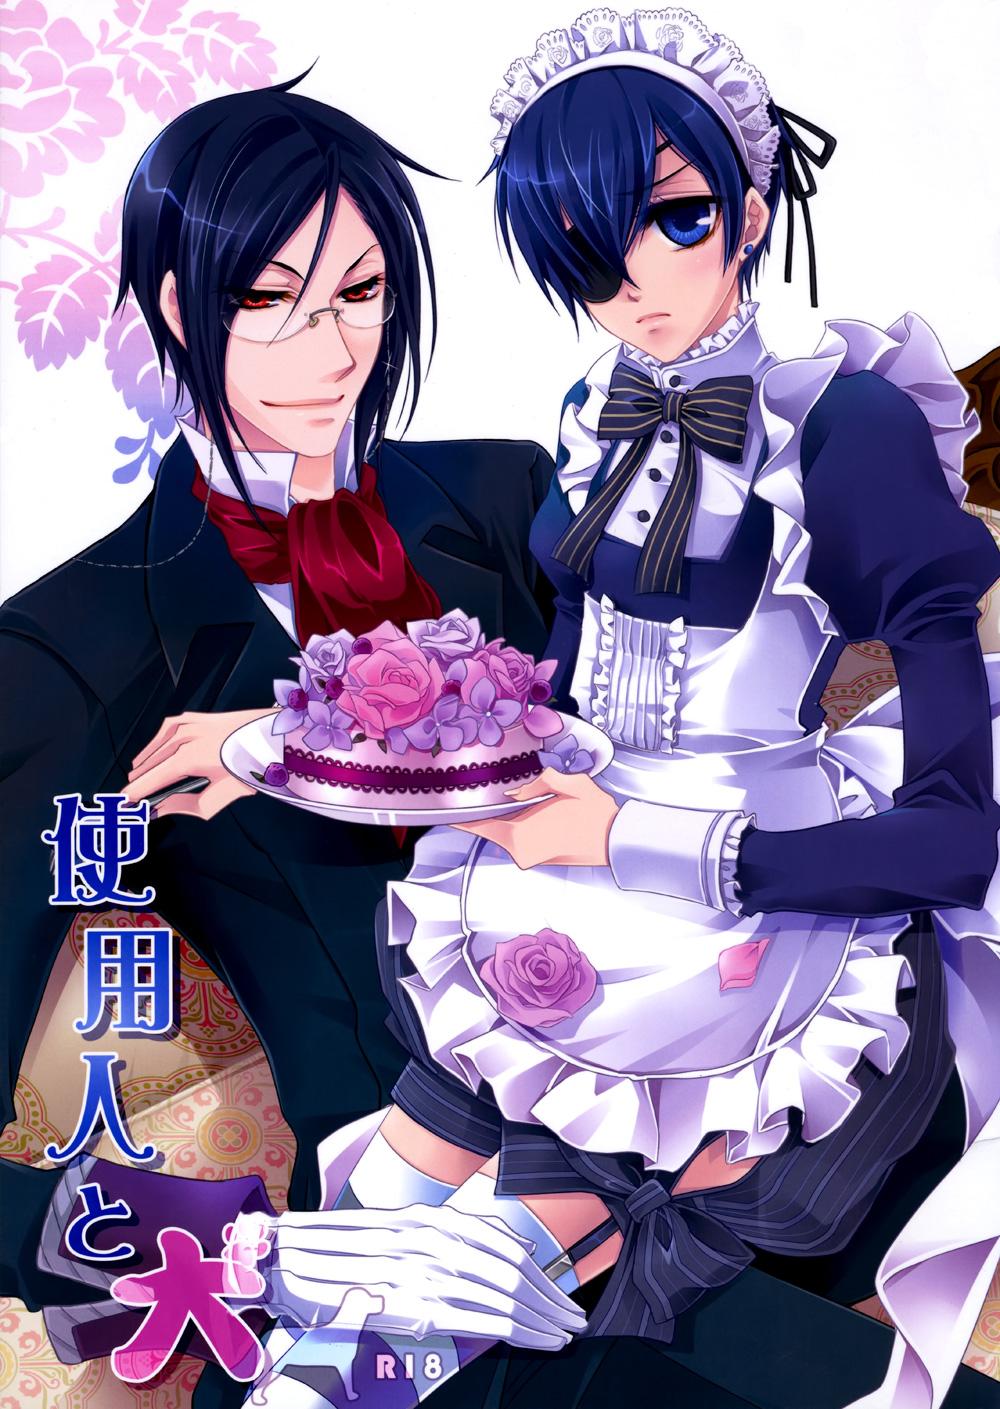 Exgirlfriend Shiyounin to Inu - Black butler Gay 3some - Page 1